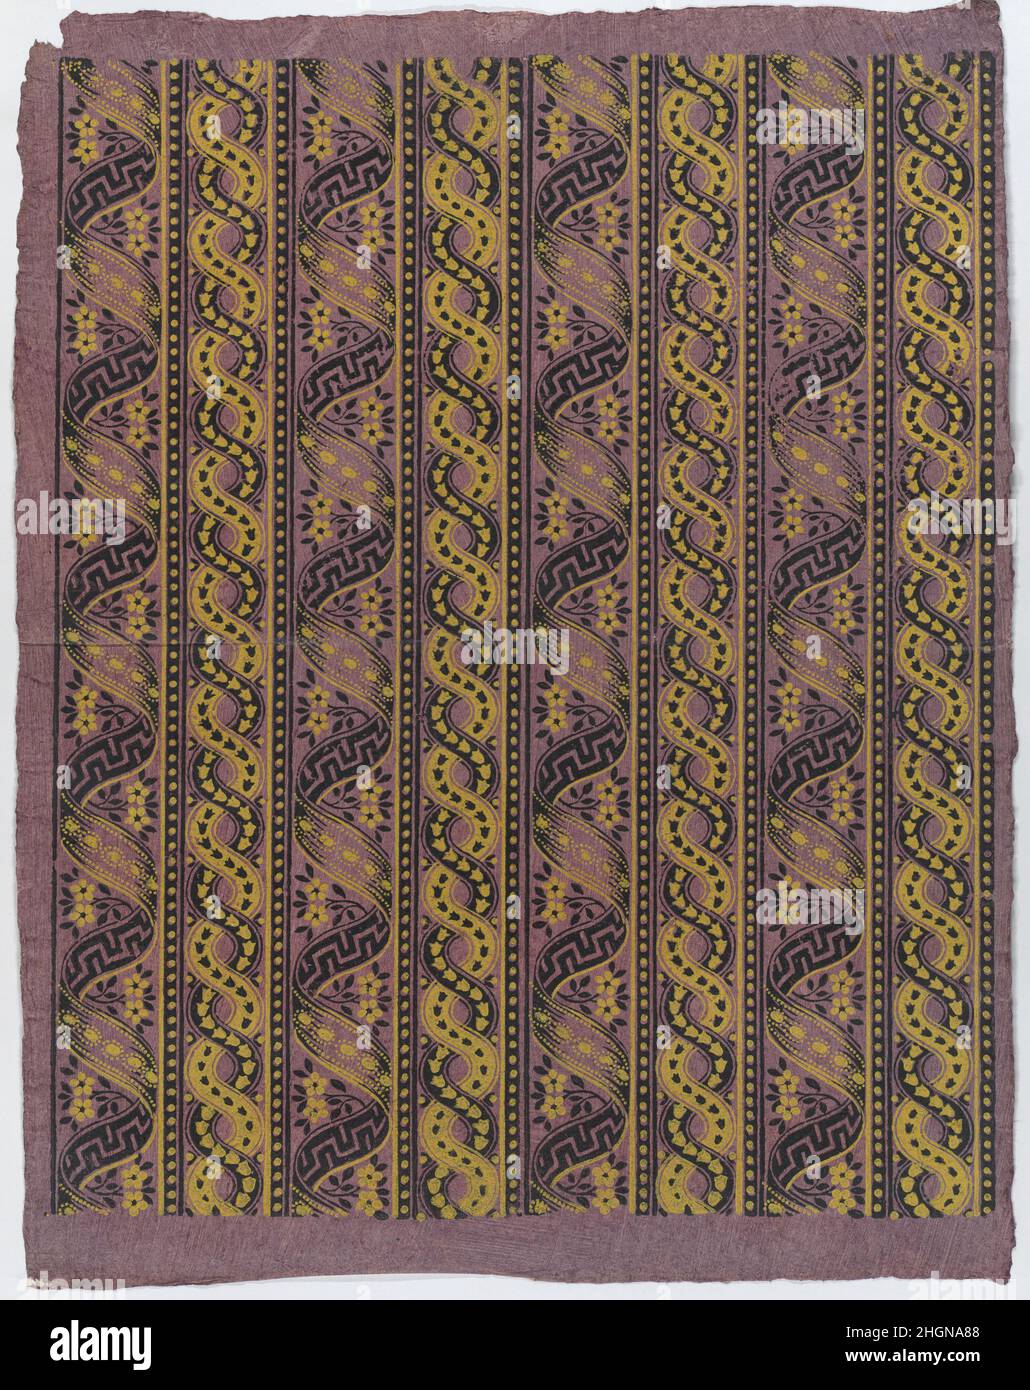 Sheet with four borders with guilloche and ribbon patterns late 18th–mid-19th century Anonymous. Sheet with four borders with guilloche and ribbon patterns. Anonymous , Italian, late 18th-mid 19th century. late 18th–mid-19th century. Relief print (wood or metal). Prints Stock Photo